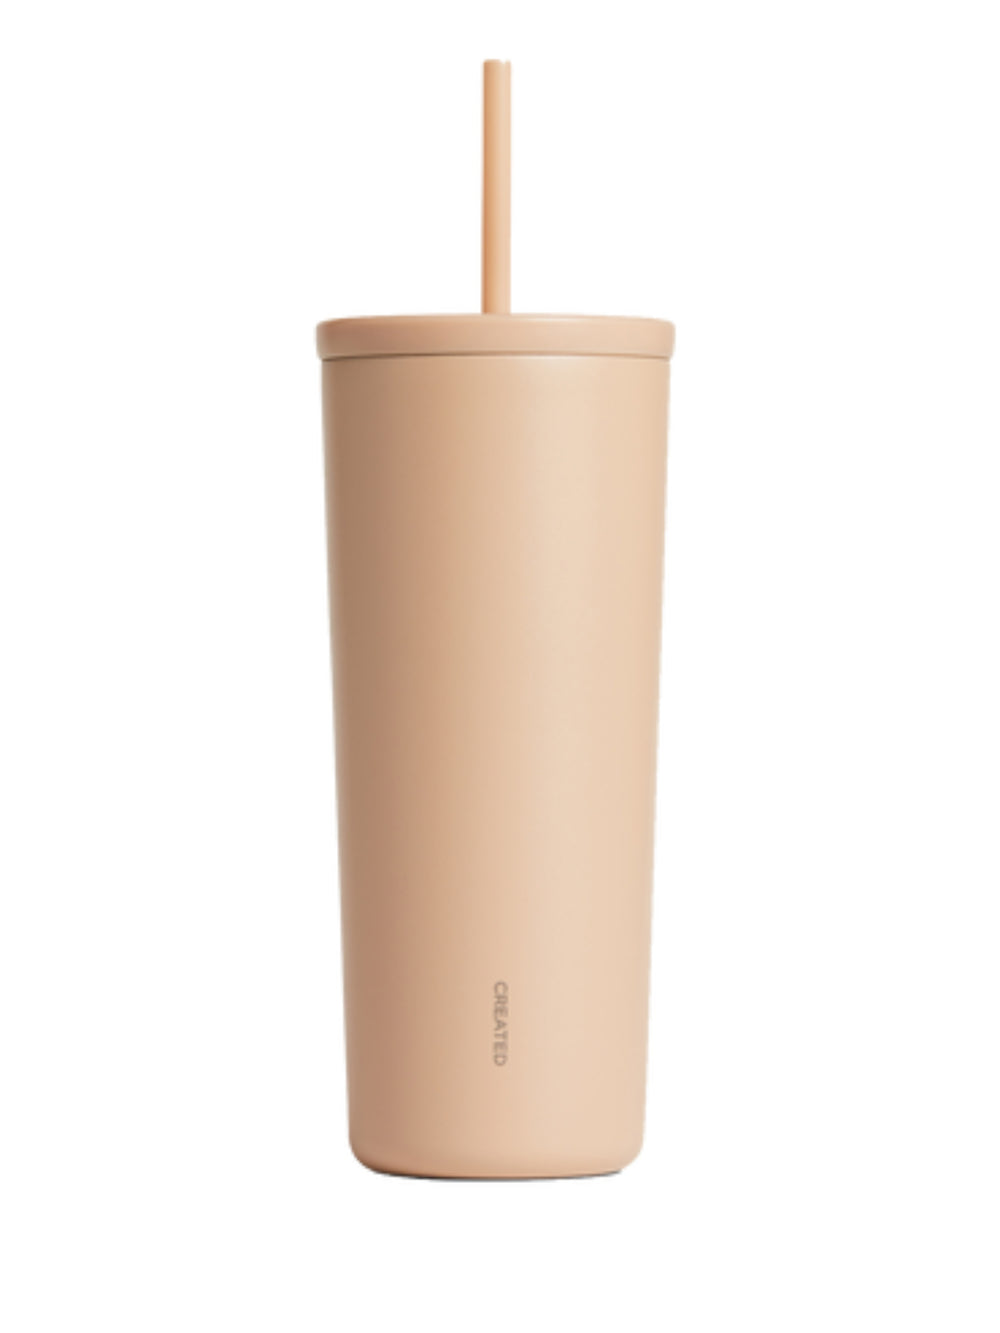 Photo of CREATED CO. Cold Cup (24oz/709ml) ( Desert ) [ Created Co. ] [ Reusable Cups ]